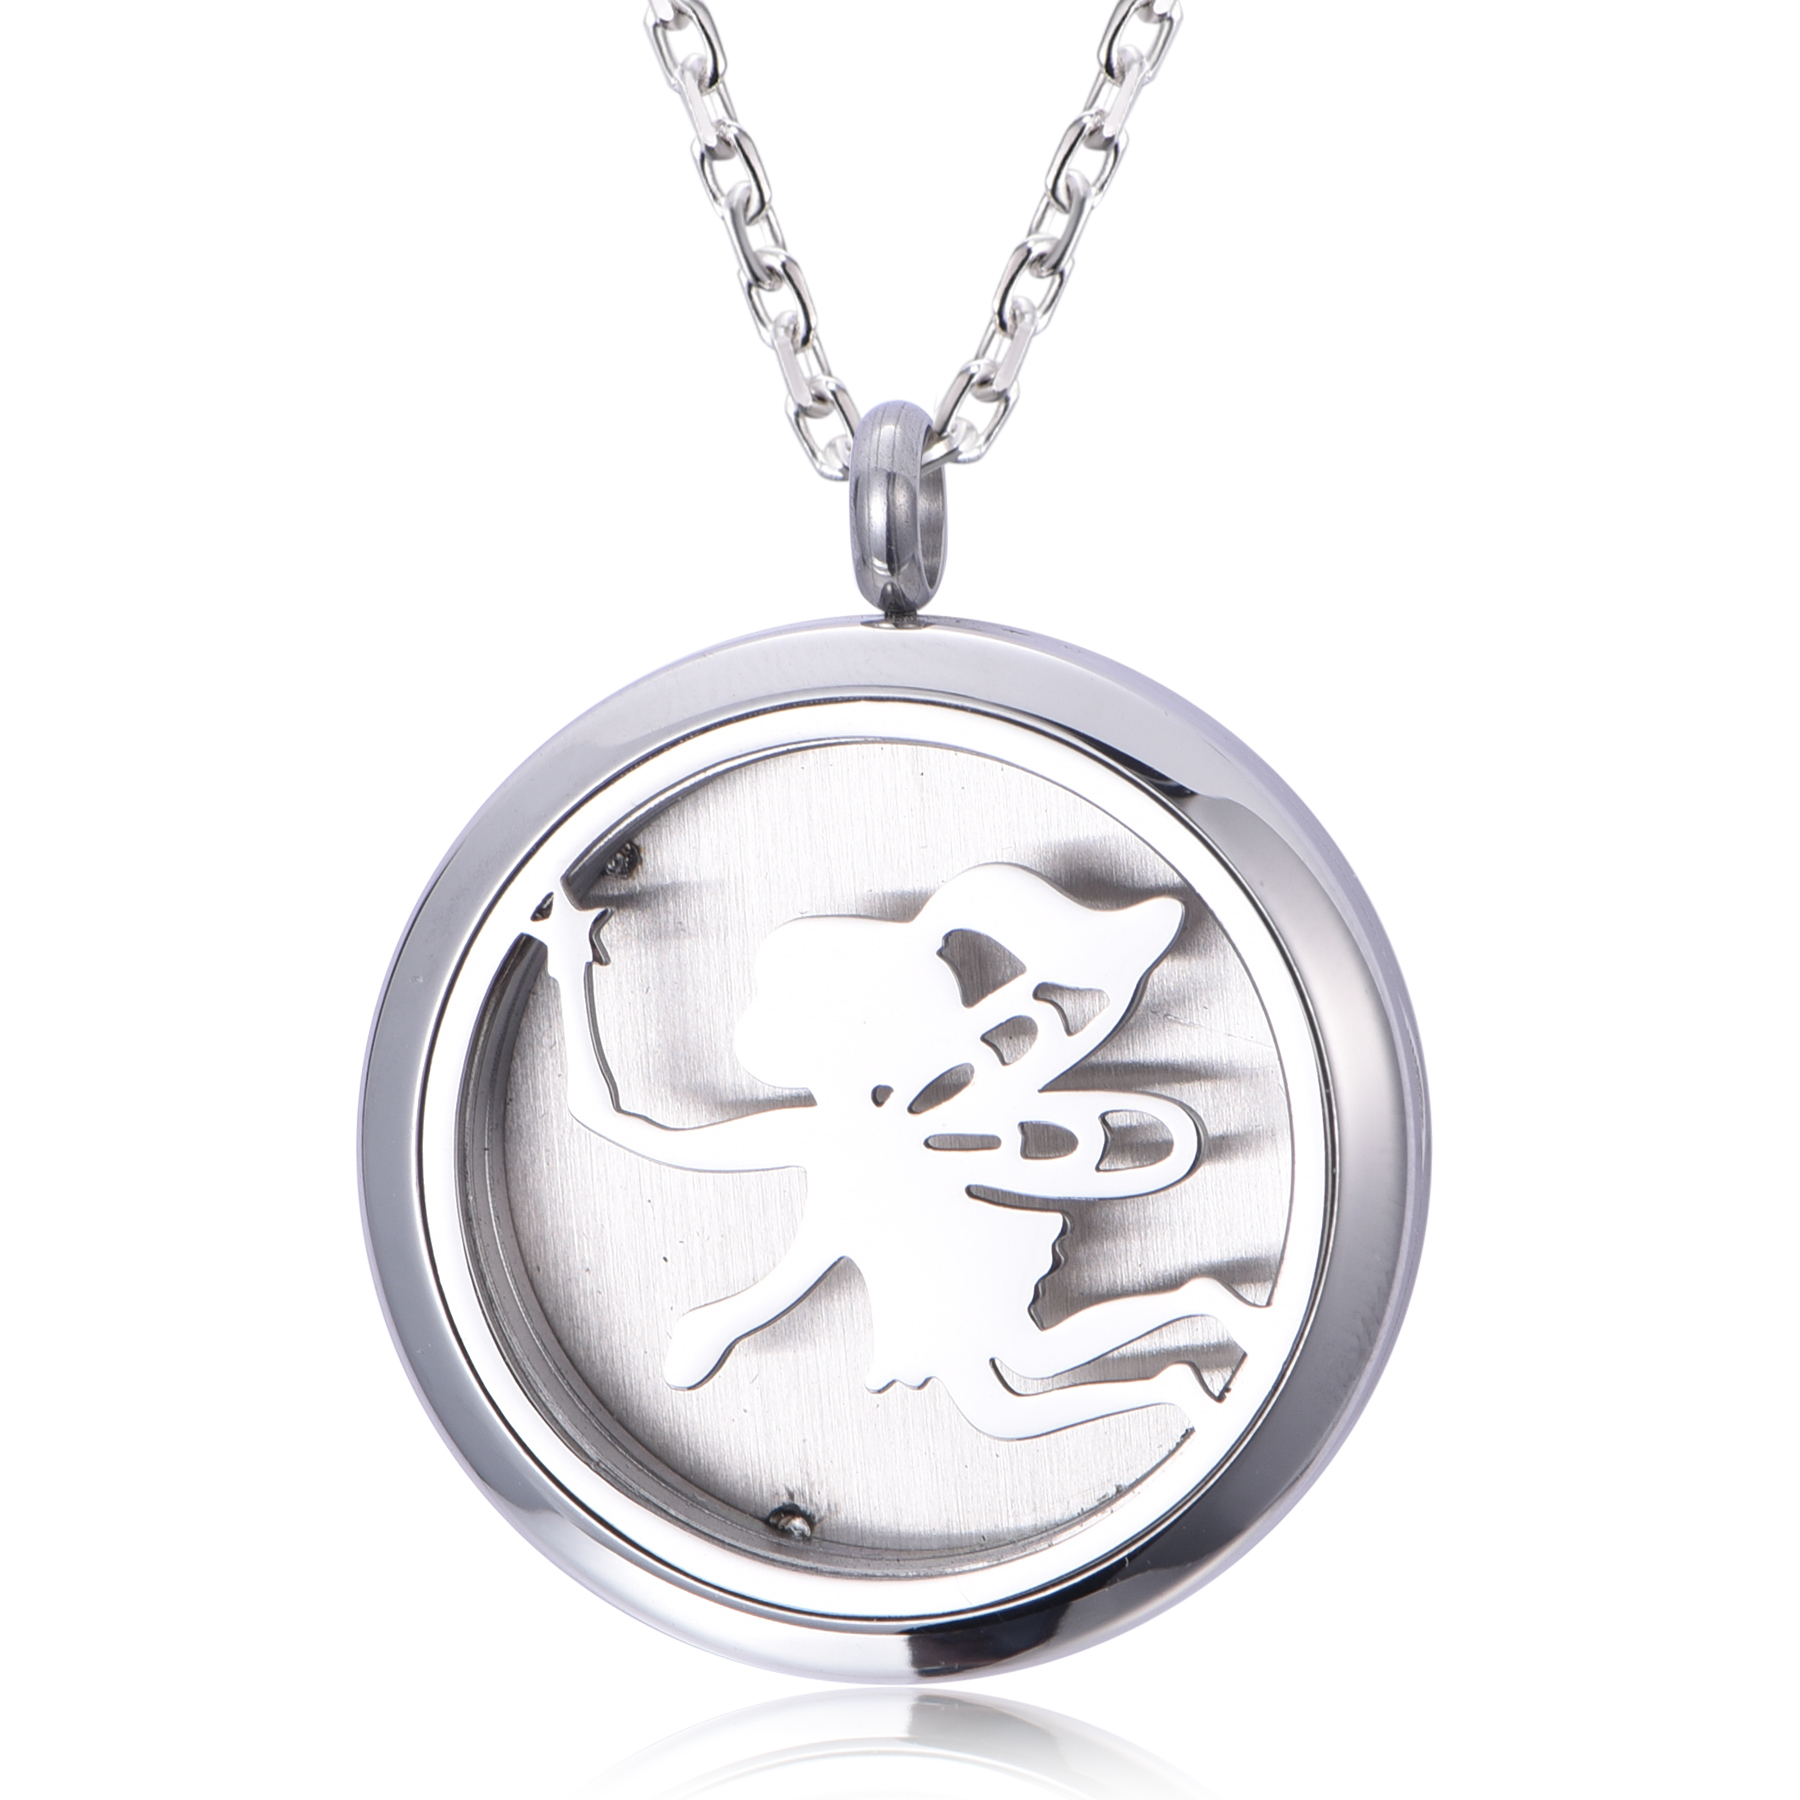 Elf Angel Girl Stainless Steel Perfume Diffuse Locket Pendant Necklace NS10-06